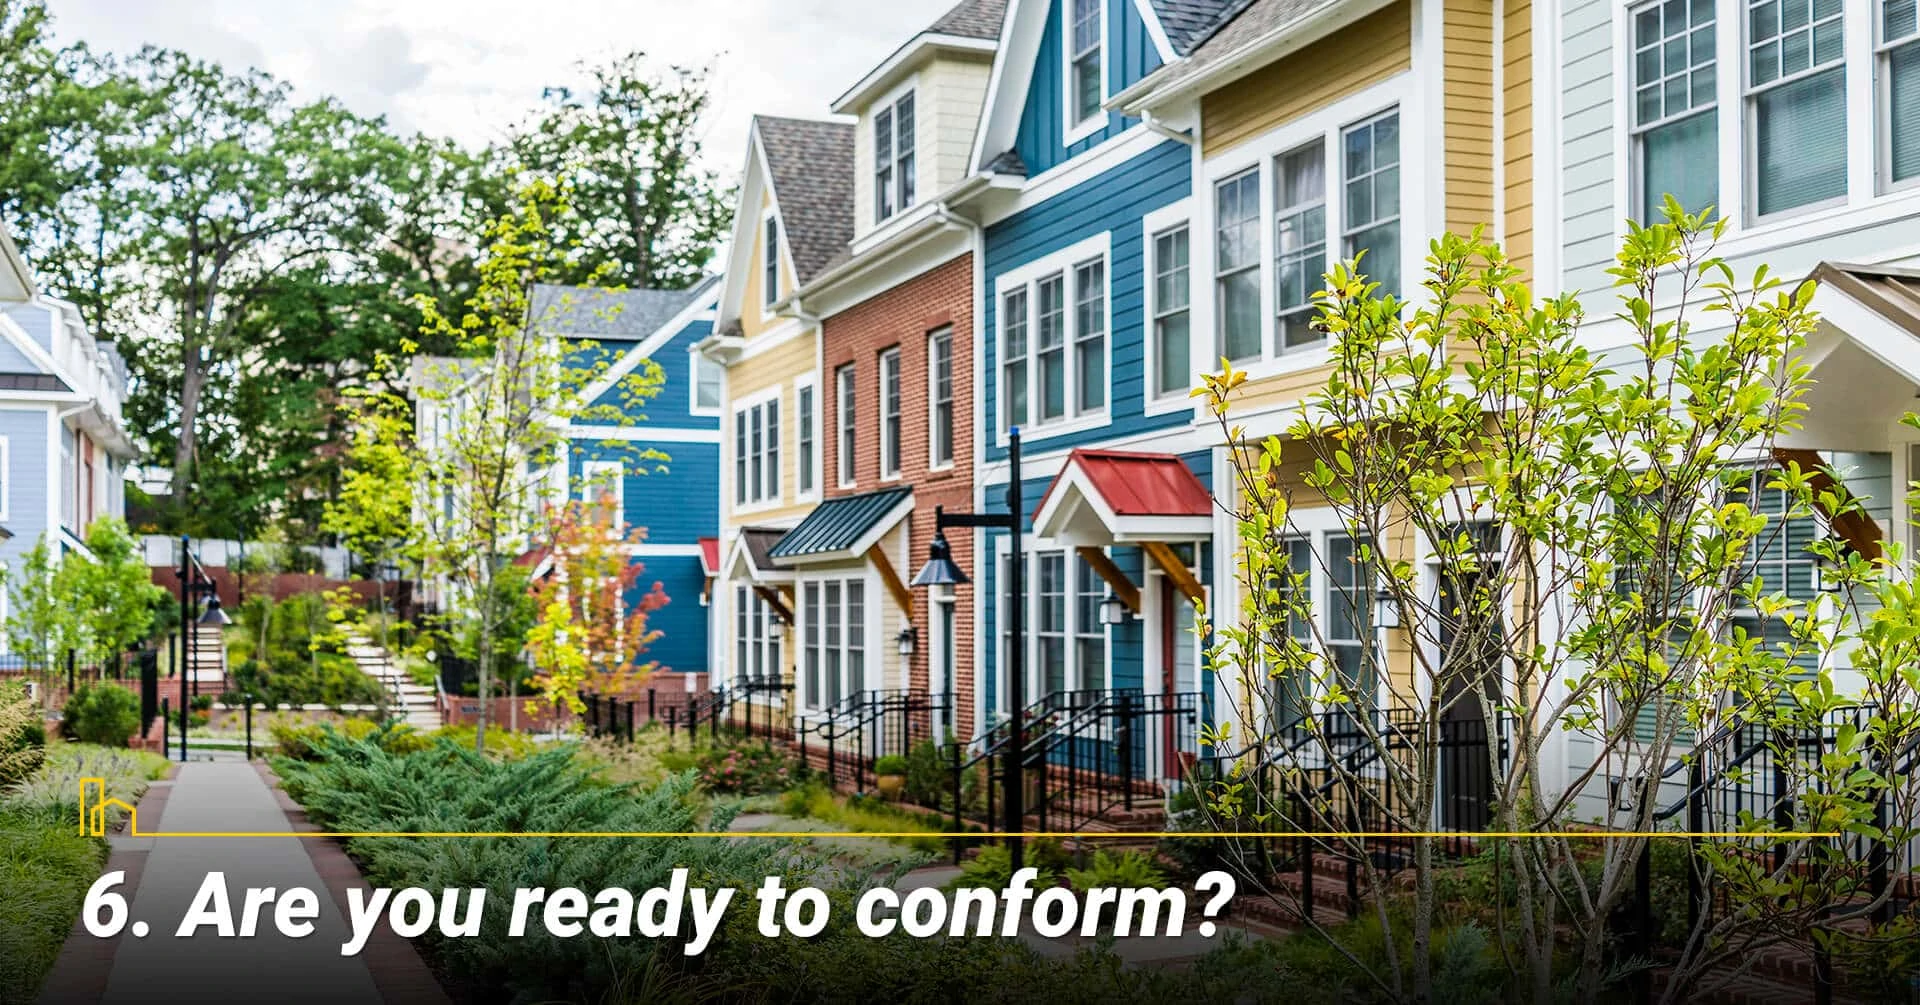 Are you ready to conform? follow association rules